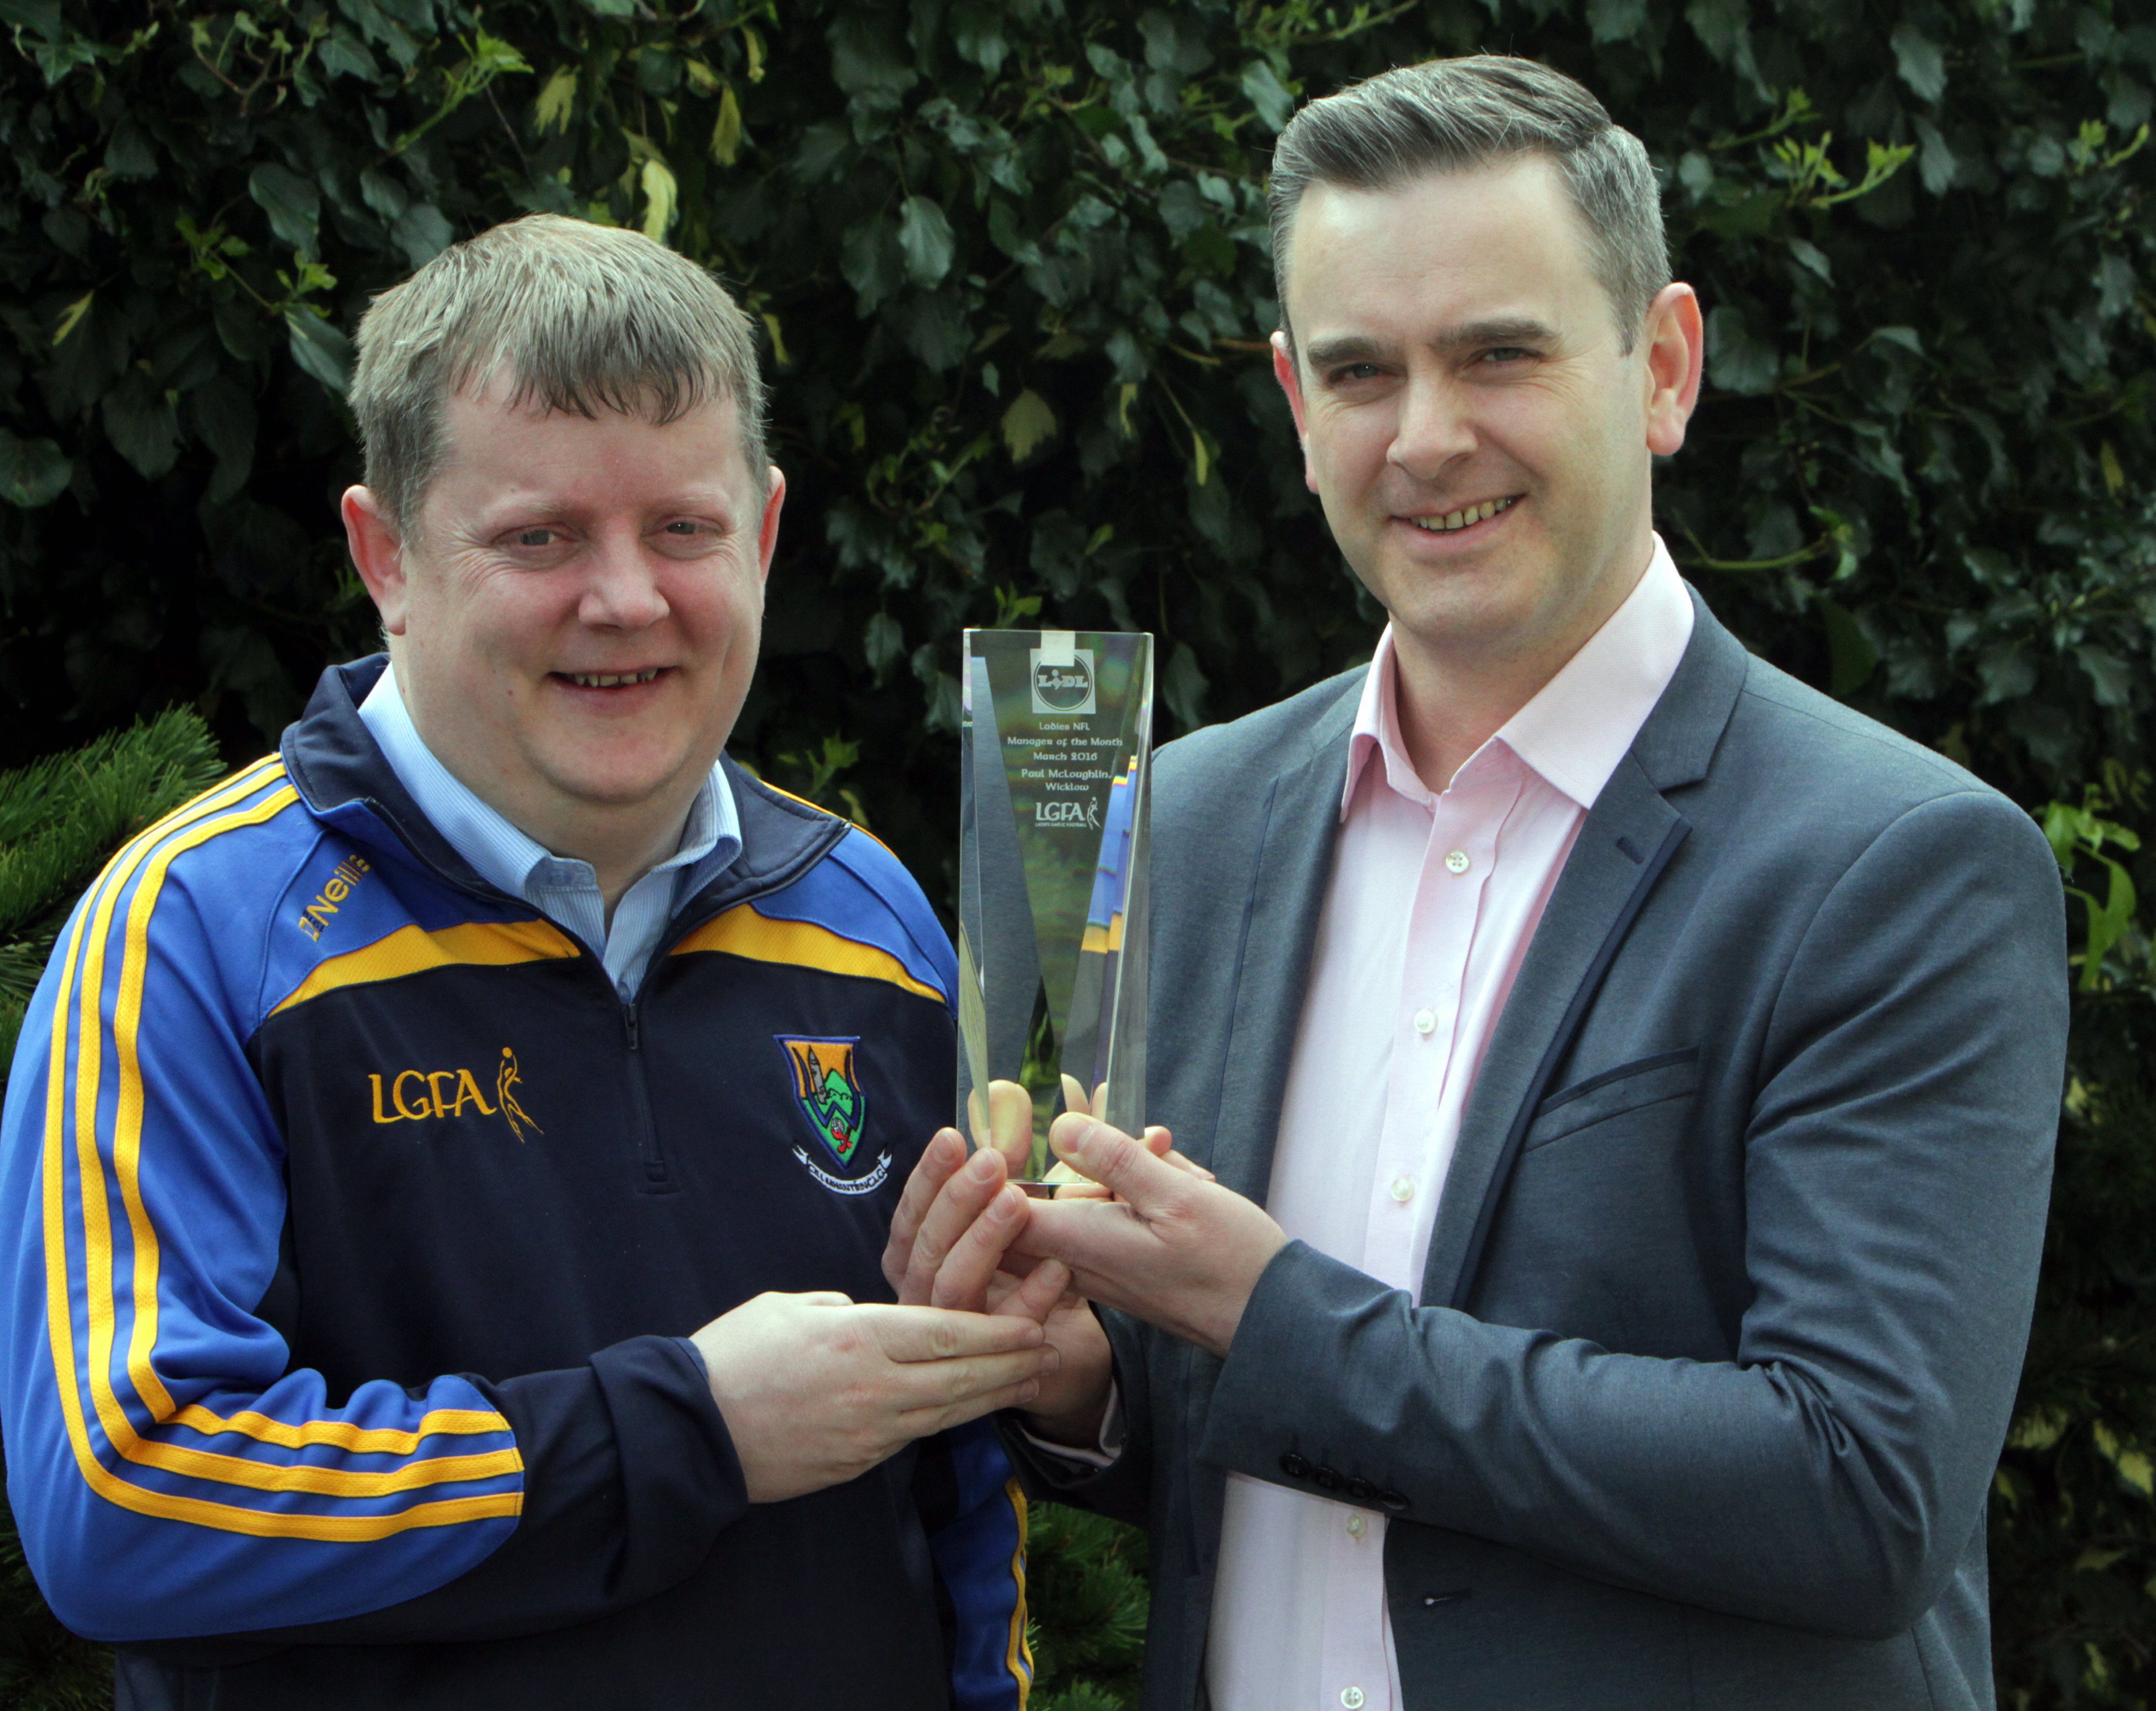 PIC OF LTOR, PAUL MC LOUGHLIN MANAGER OF WICKLOW LADIES GAA TEAM RECEIVING THE LGFA MANAGER OF THE MONTH AWARD FOR MARCH , FROM MR AIDAN FLEMING LIDL IRELAND . PIC JIM WALPOLE STAR 12/04/2016